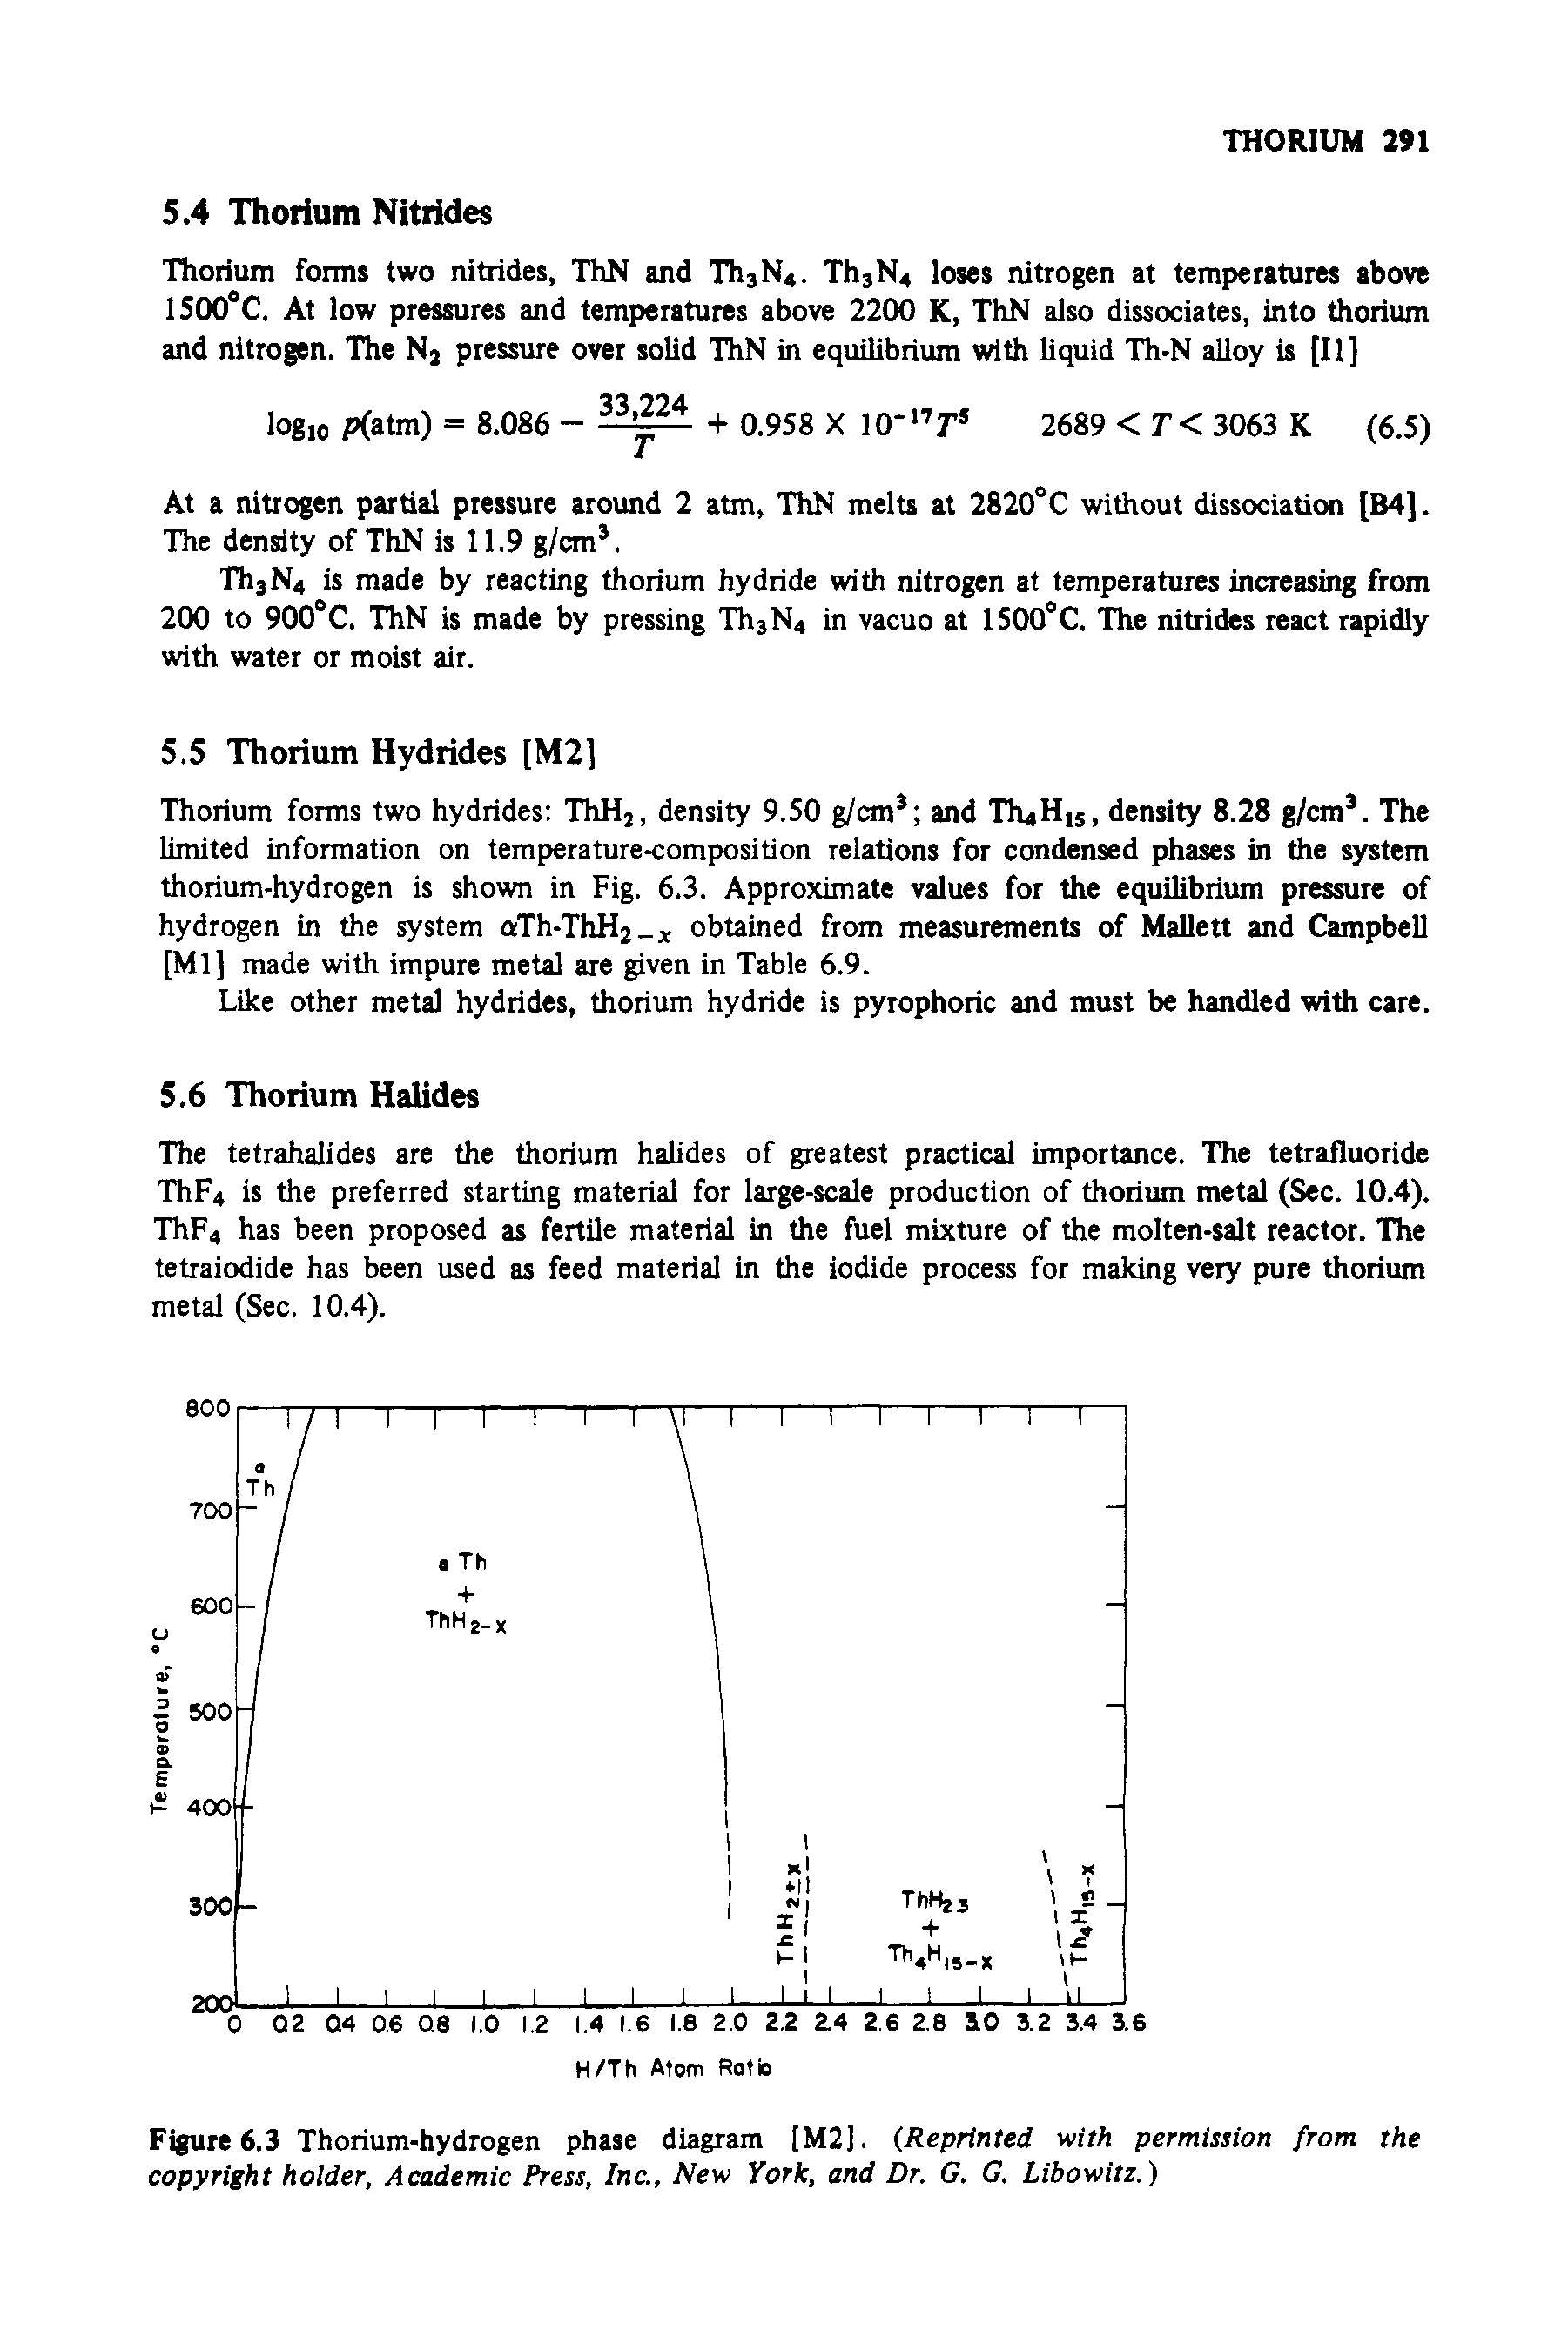 Figure 6.3 Thorium-hydrogen phase diagram [M2]. (Reprinted with permission from the copyright holder. Academic Press, Inc., New York, and Dr. G. G. Libowitz.)...